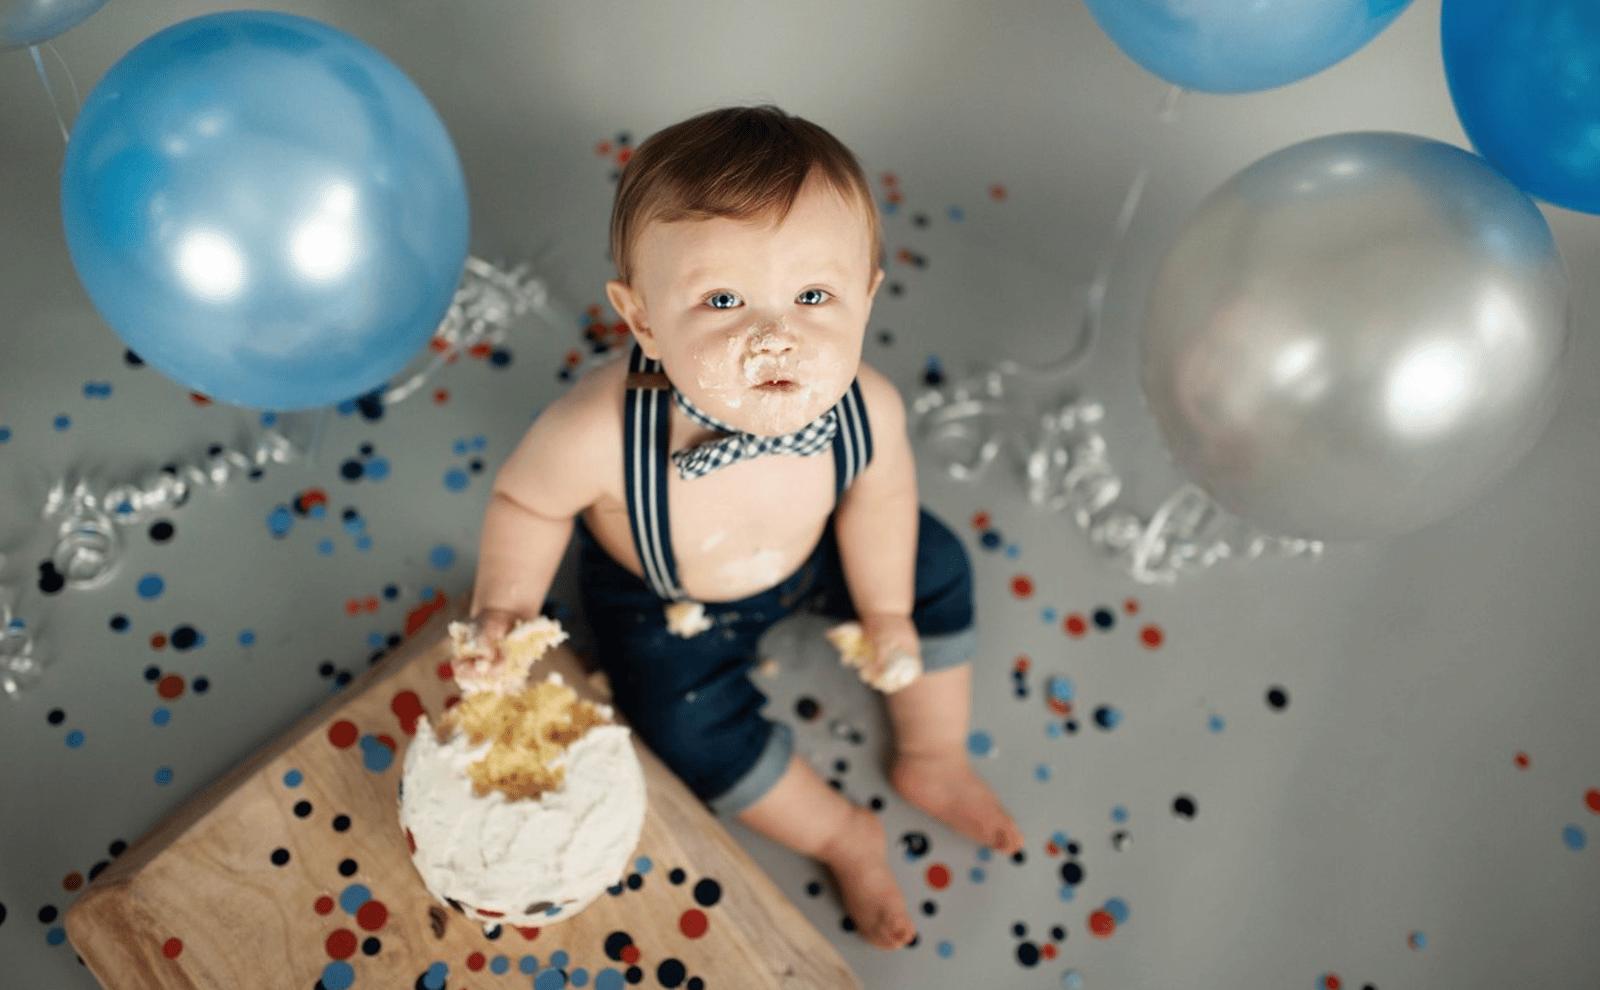 The Best First Birthday Party Ideas - Easy, Cheap, and Eco-Friendly |  Poppikit Cake Kits